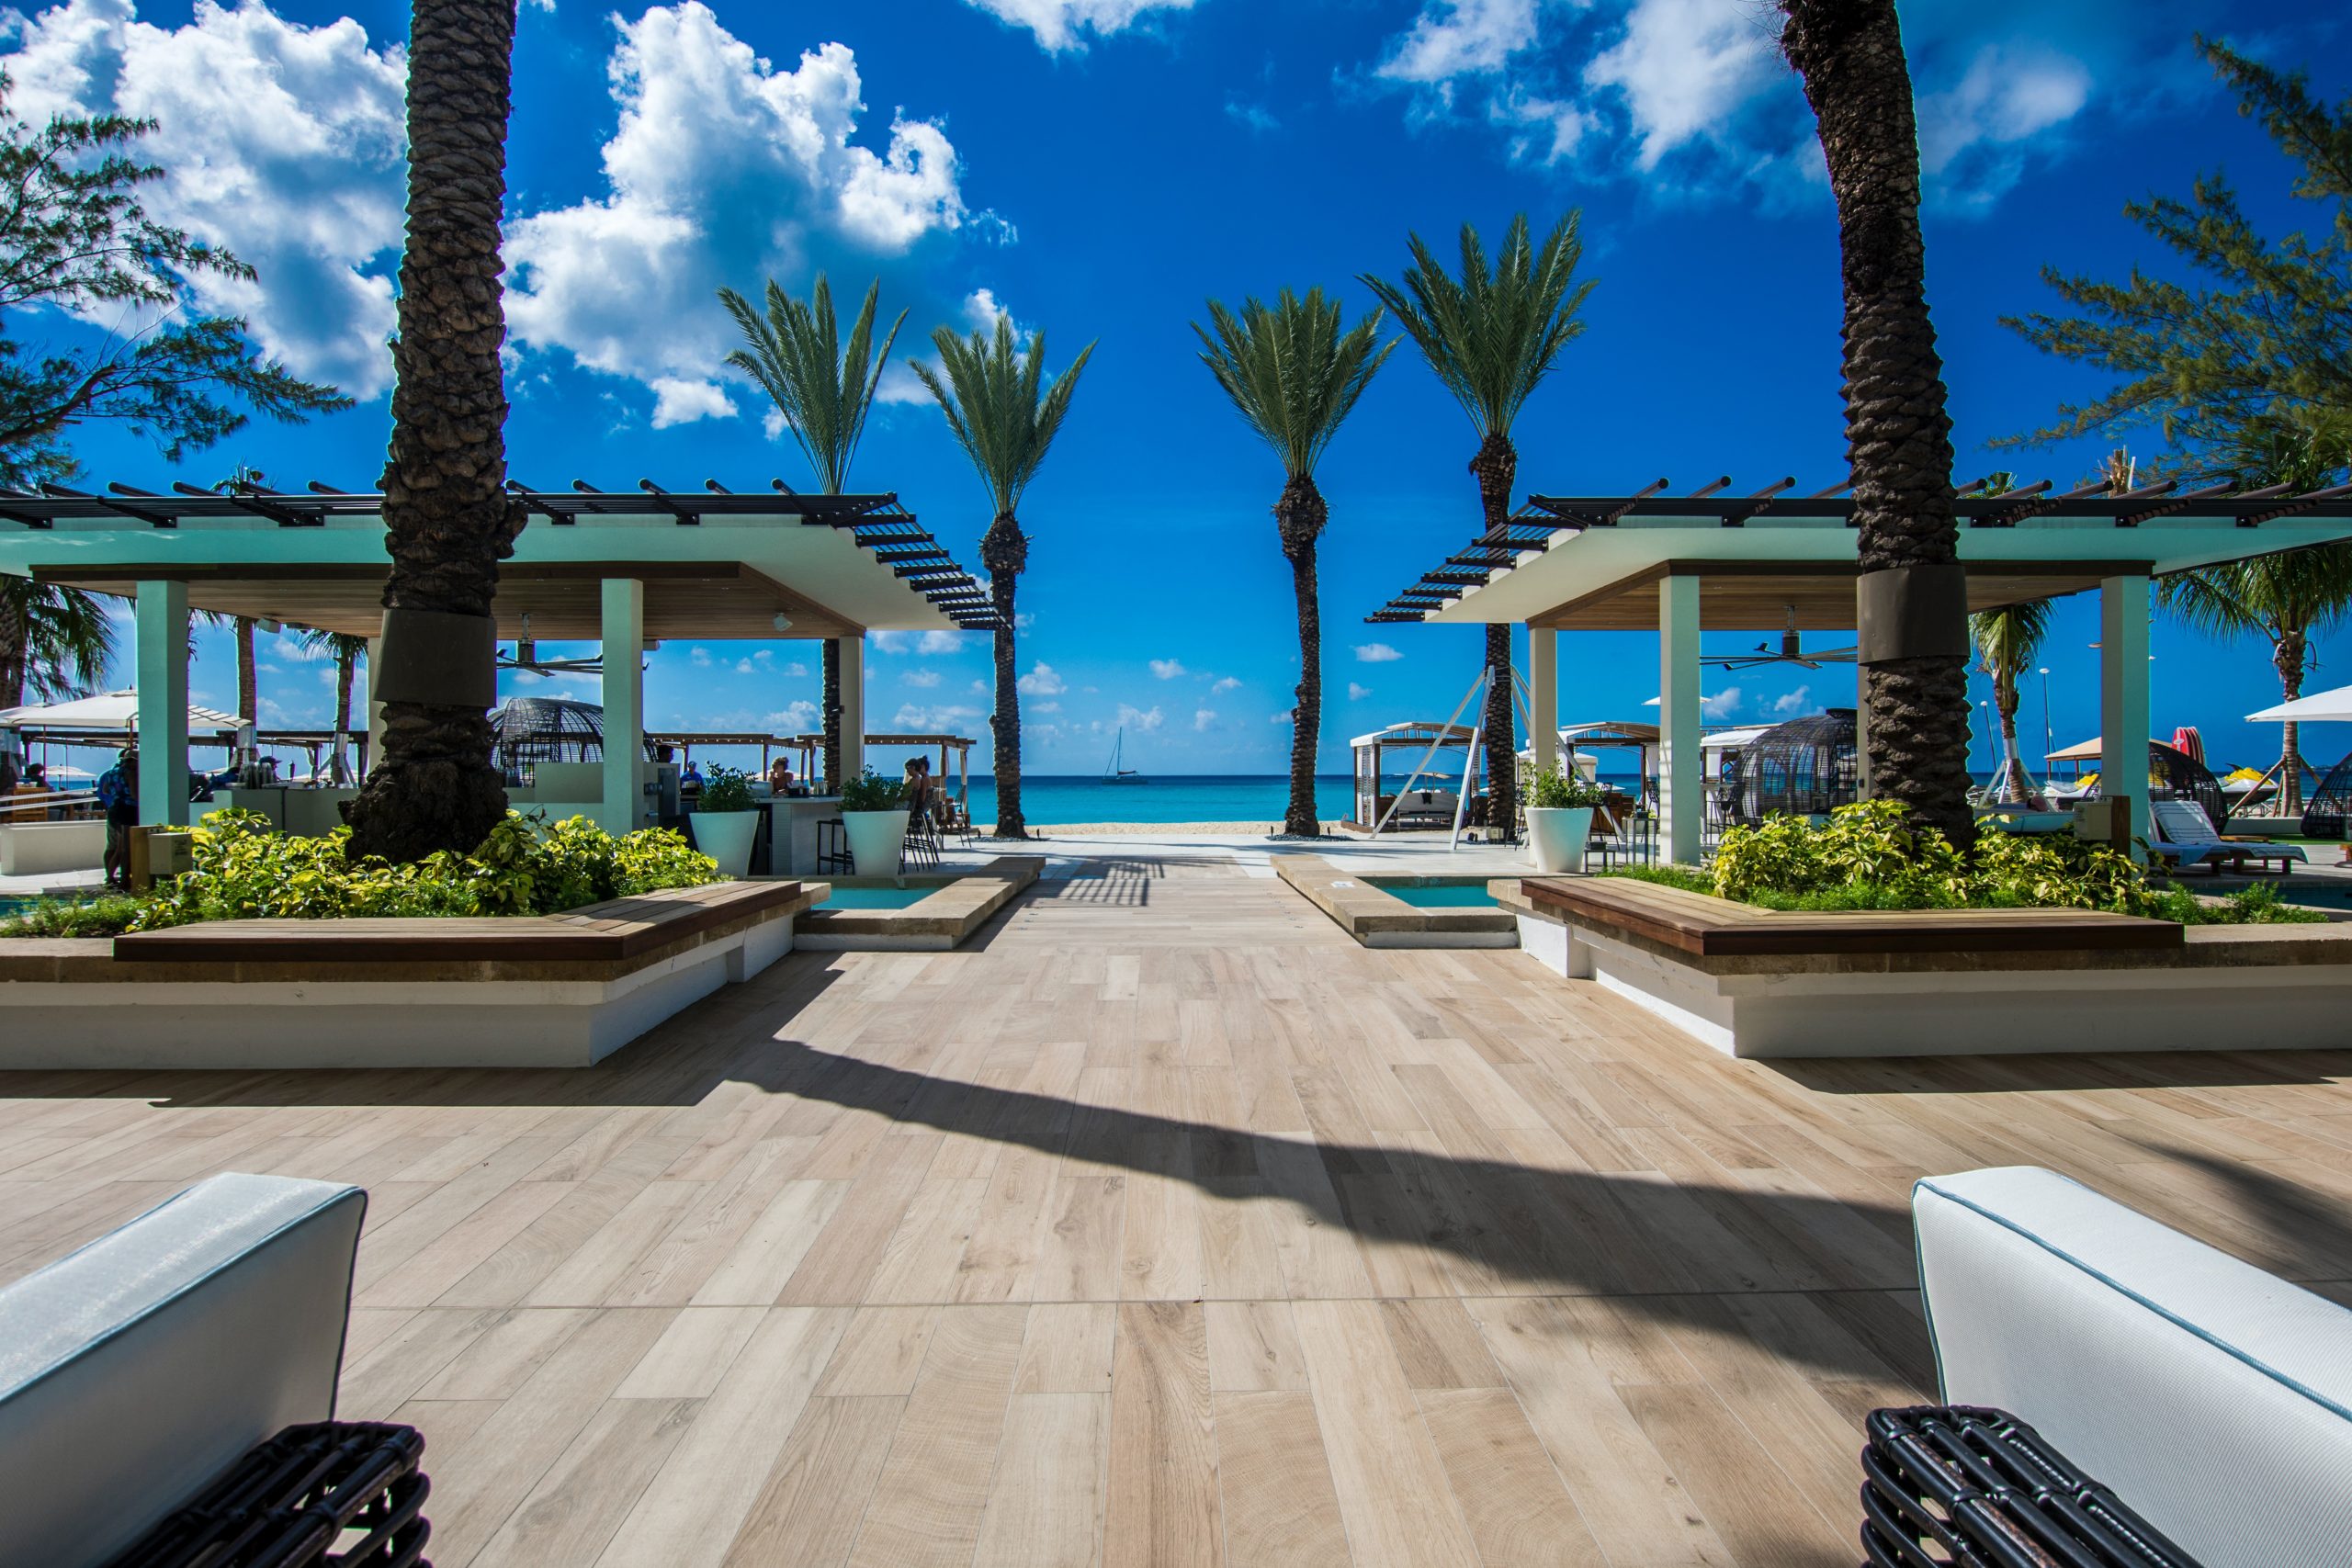 An image of a resort in the Cayman Island